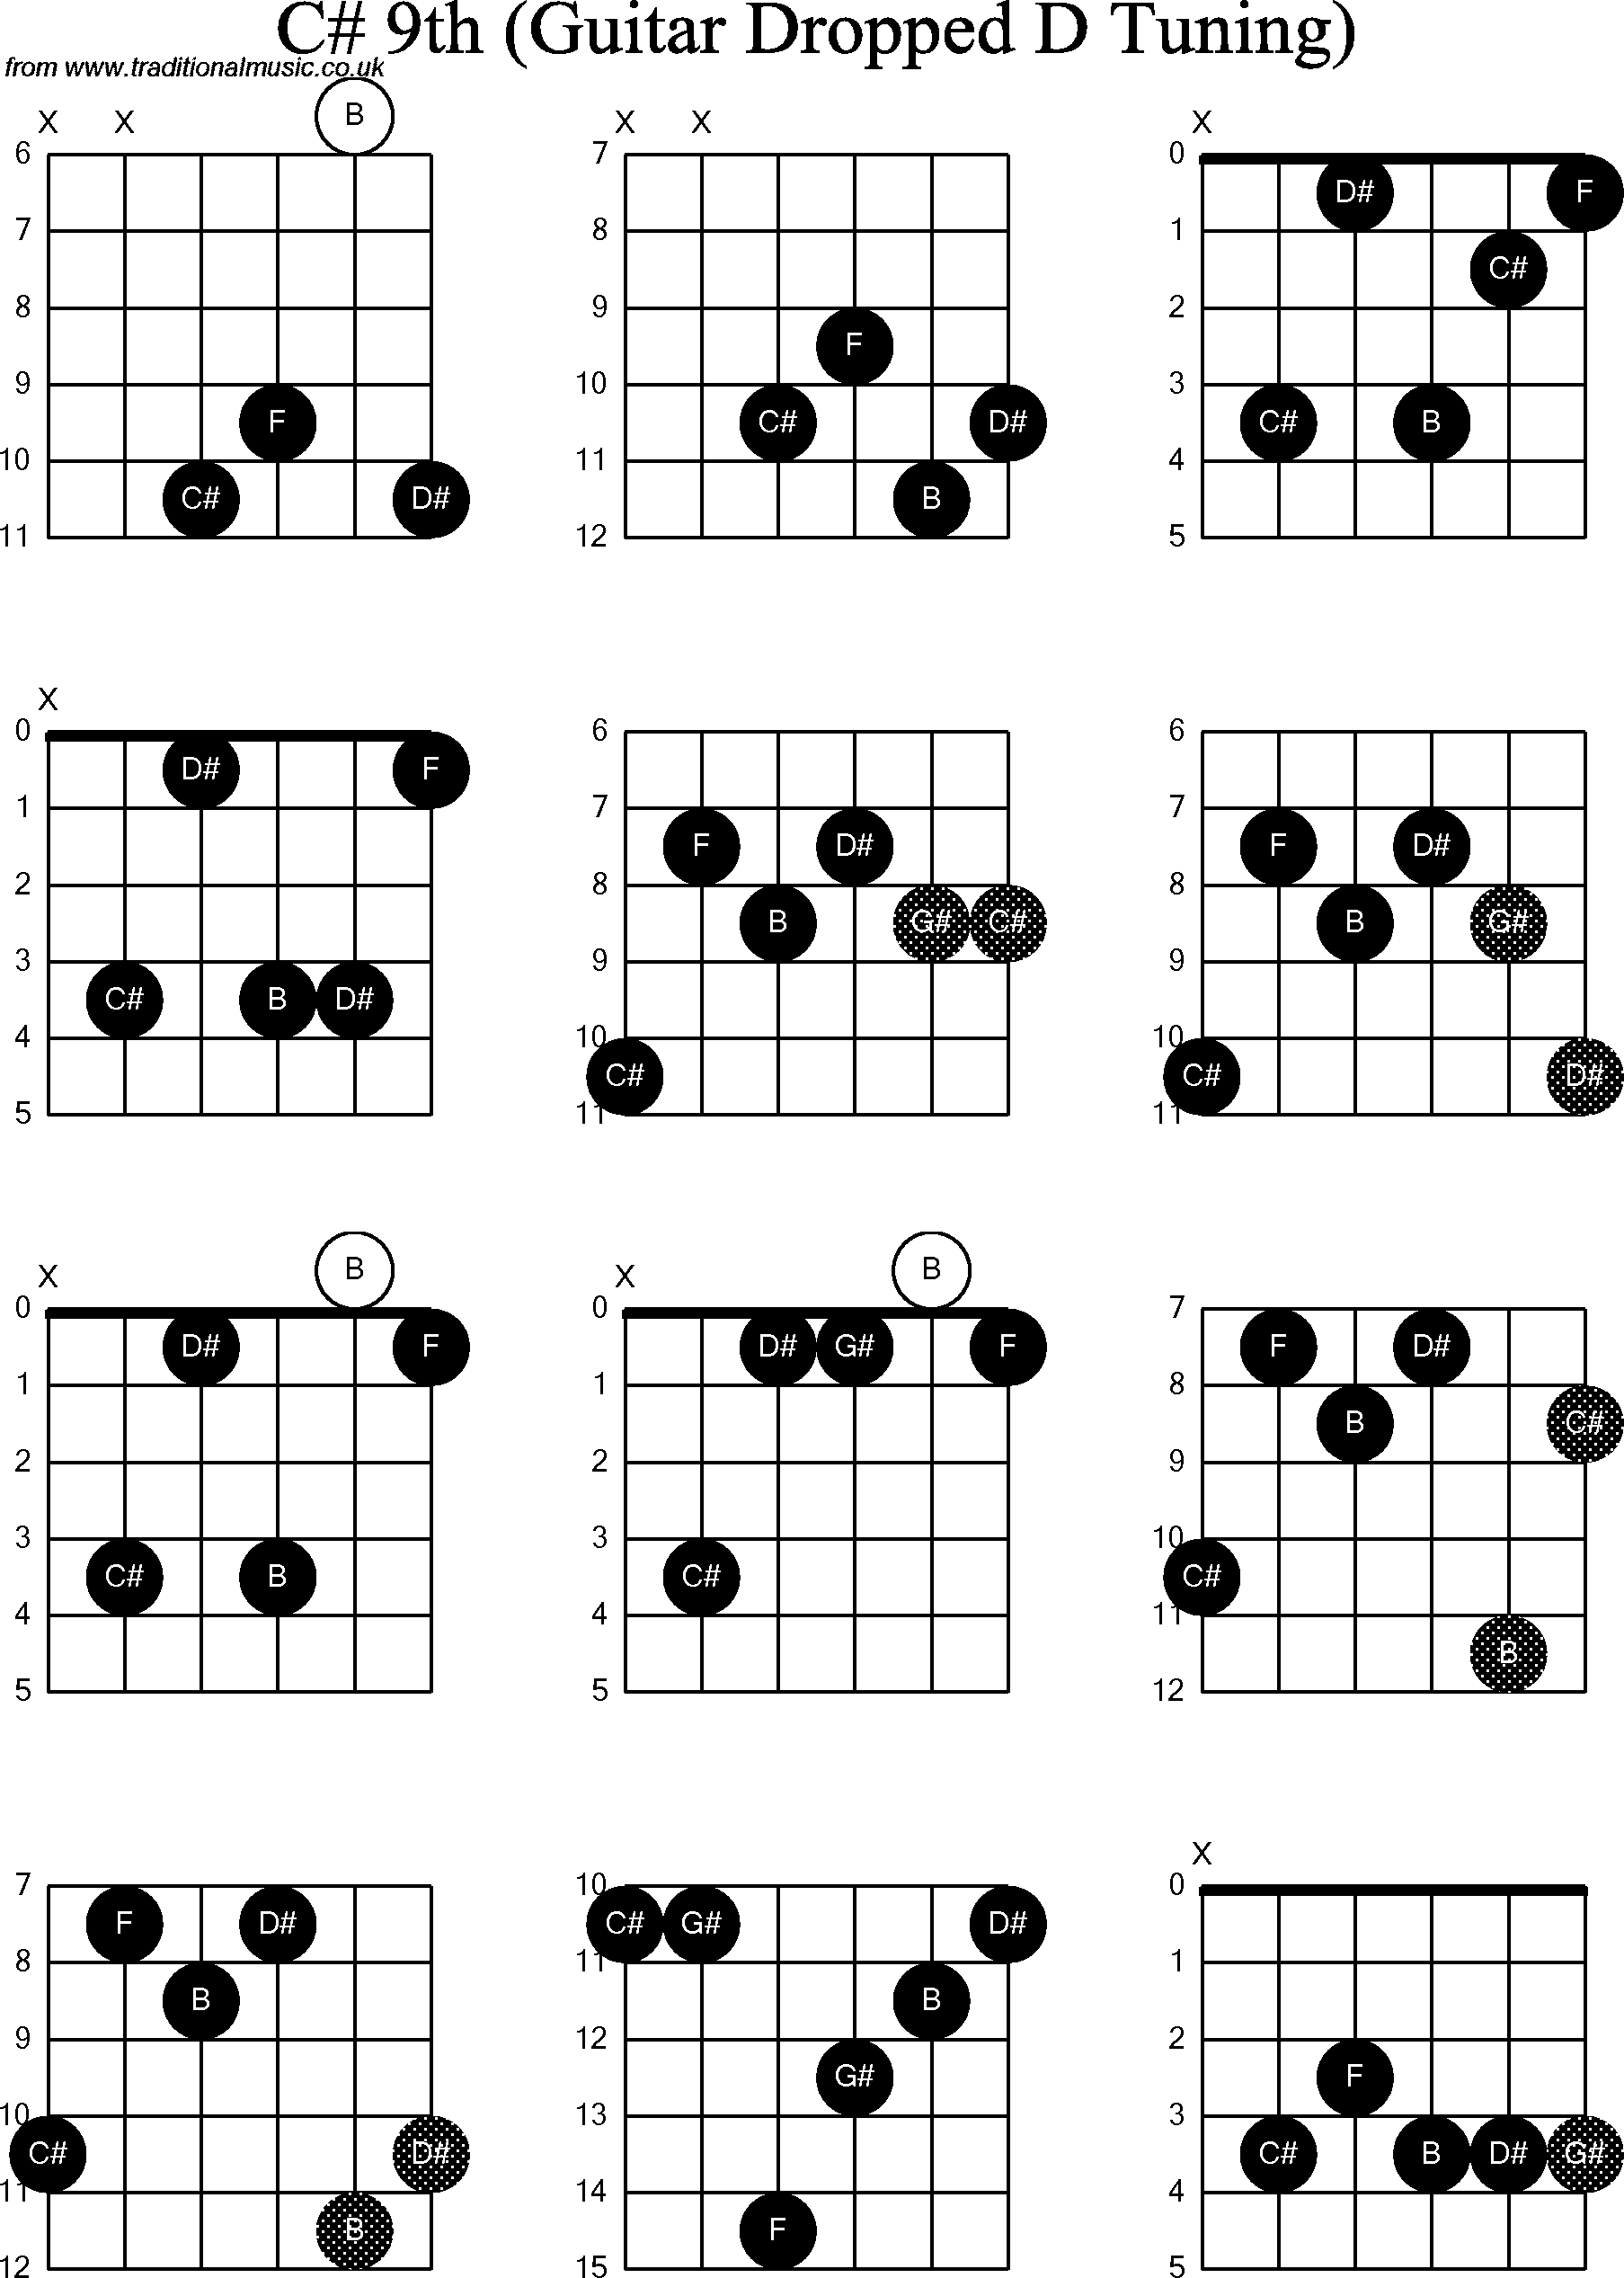 Chord diagrams for dropped D Guitar(DADGBE), C Sharp9th